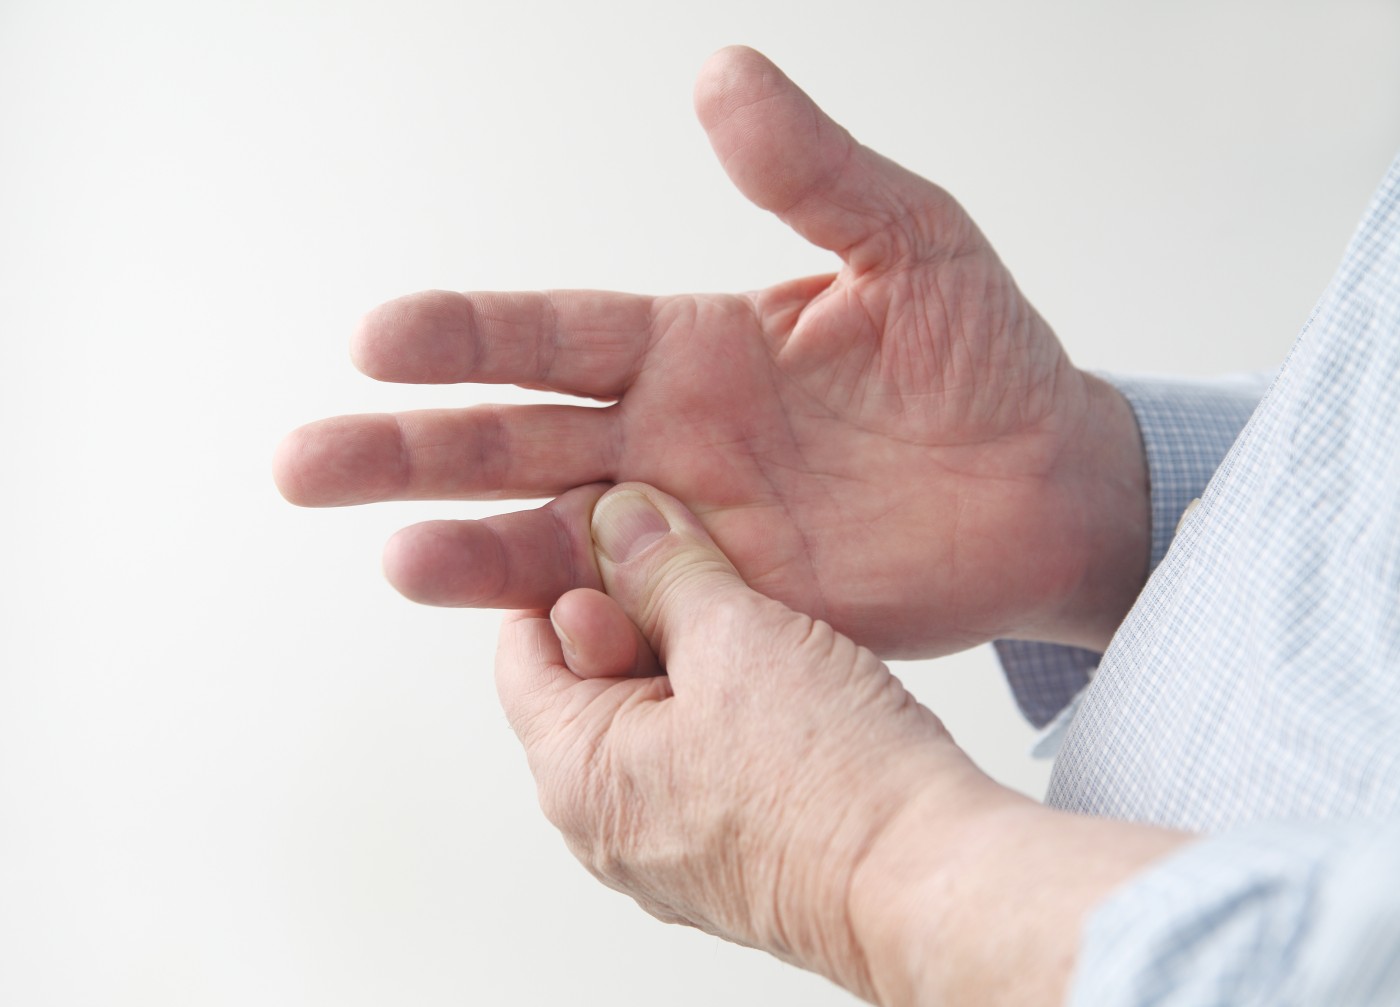 Botulinum Toxin Has Variable Effectiveness in Patients with Scleroderma-associated Raynaud’s